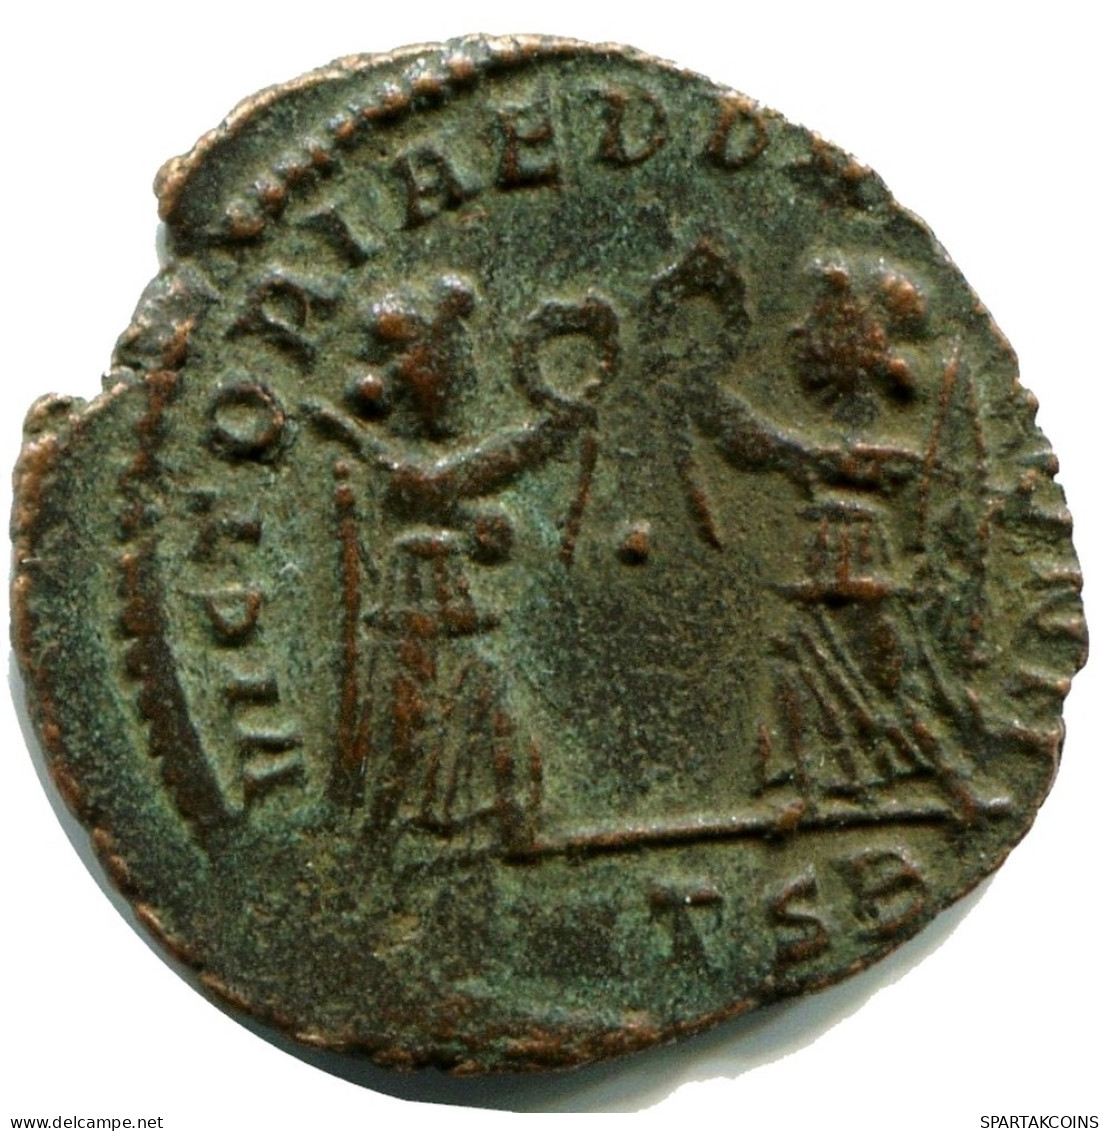 CONSTANS MINTED IN THESSALONICA FROM THE ROYAL ONTARIO MUSEUM #ANC11913.14.D.A - L'Empire Chrétien (307 à 363)